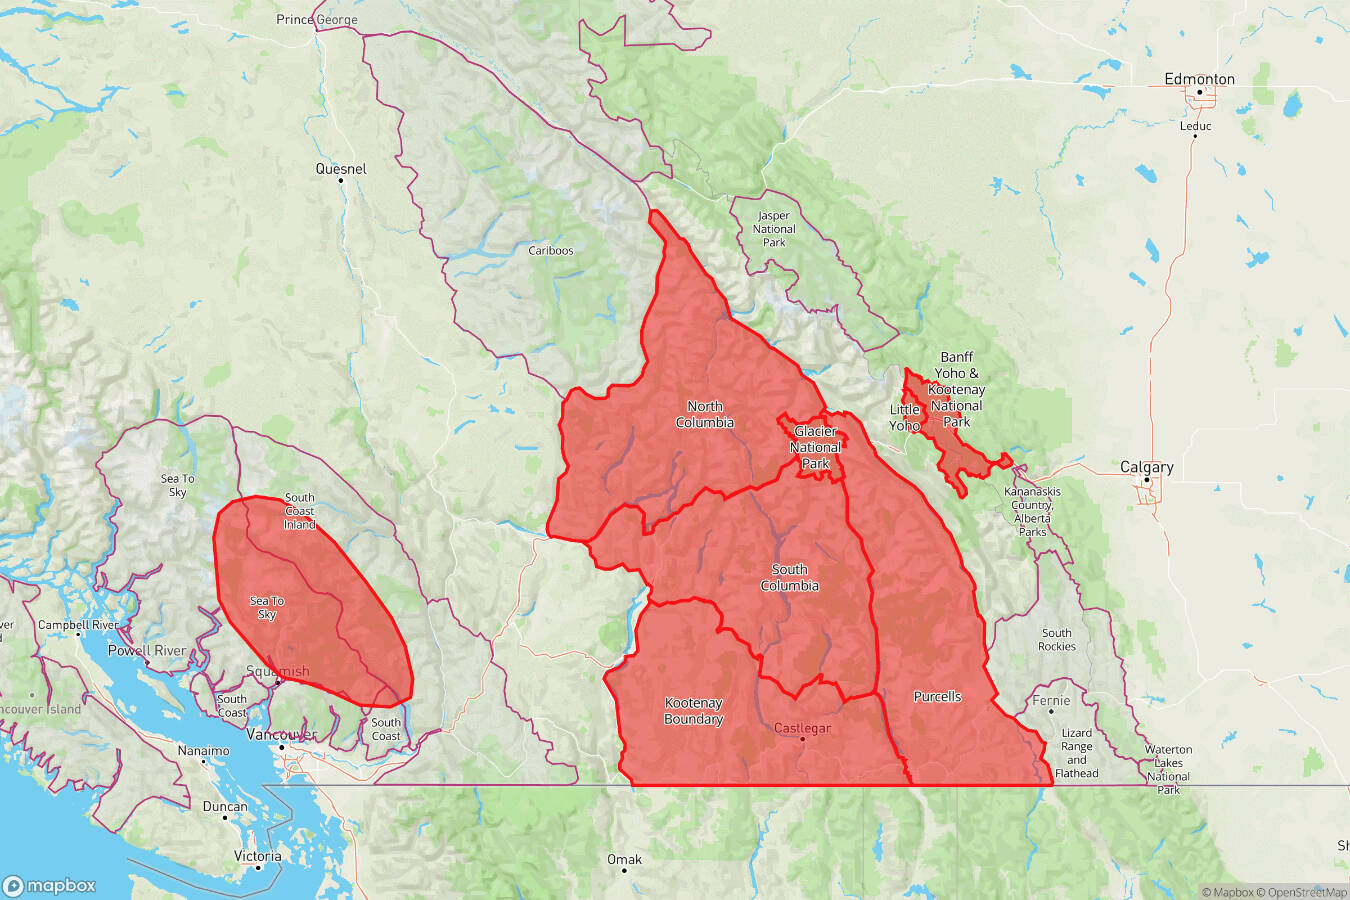 Avalanche Canada, in partnership with Parks Canada, is issuing a Special Public Avalanche Warning for recreational backcountry users across numerous forecast regions in BC and Alberta